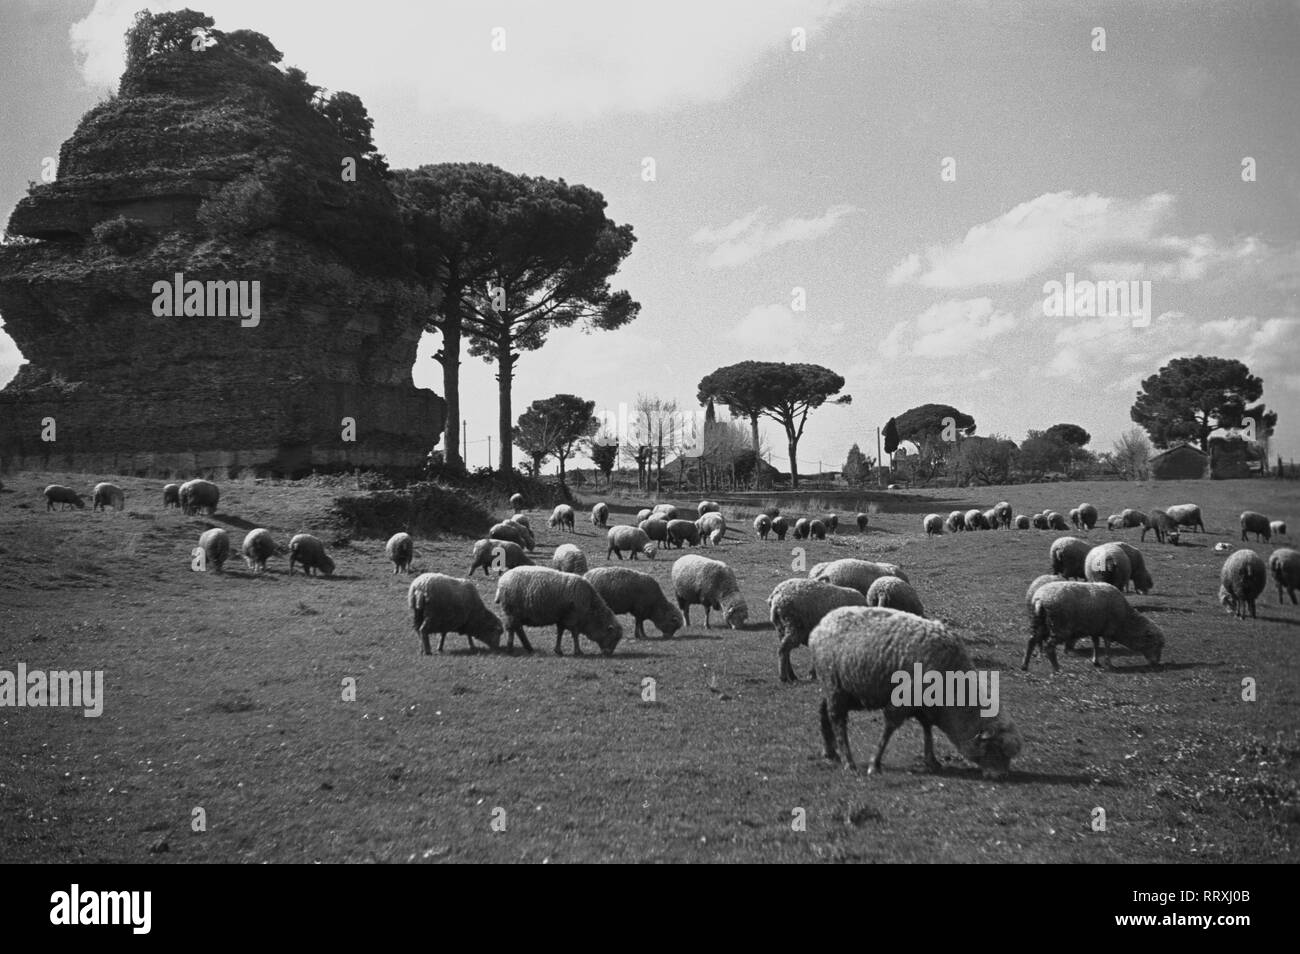 Travel to Rome - Italy end of 1950s - sheeps flock at the Latin tombs, Via Appia Antica near Rome. Schafe weiden an der Via Appia Antica bei Rom, Italien. Photo Erich Andres. Stock Photo